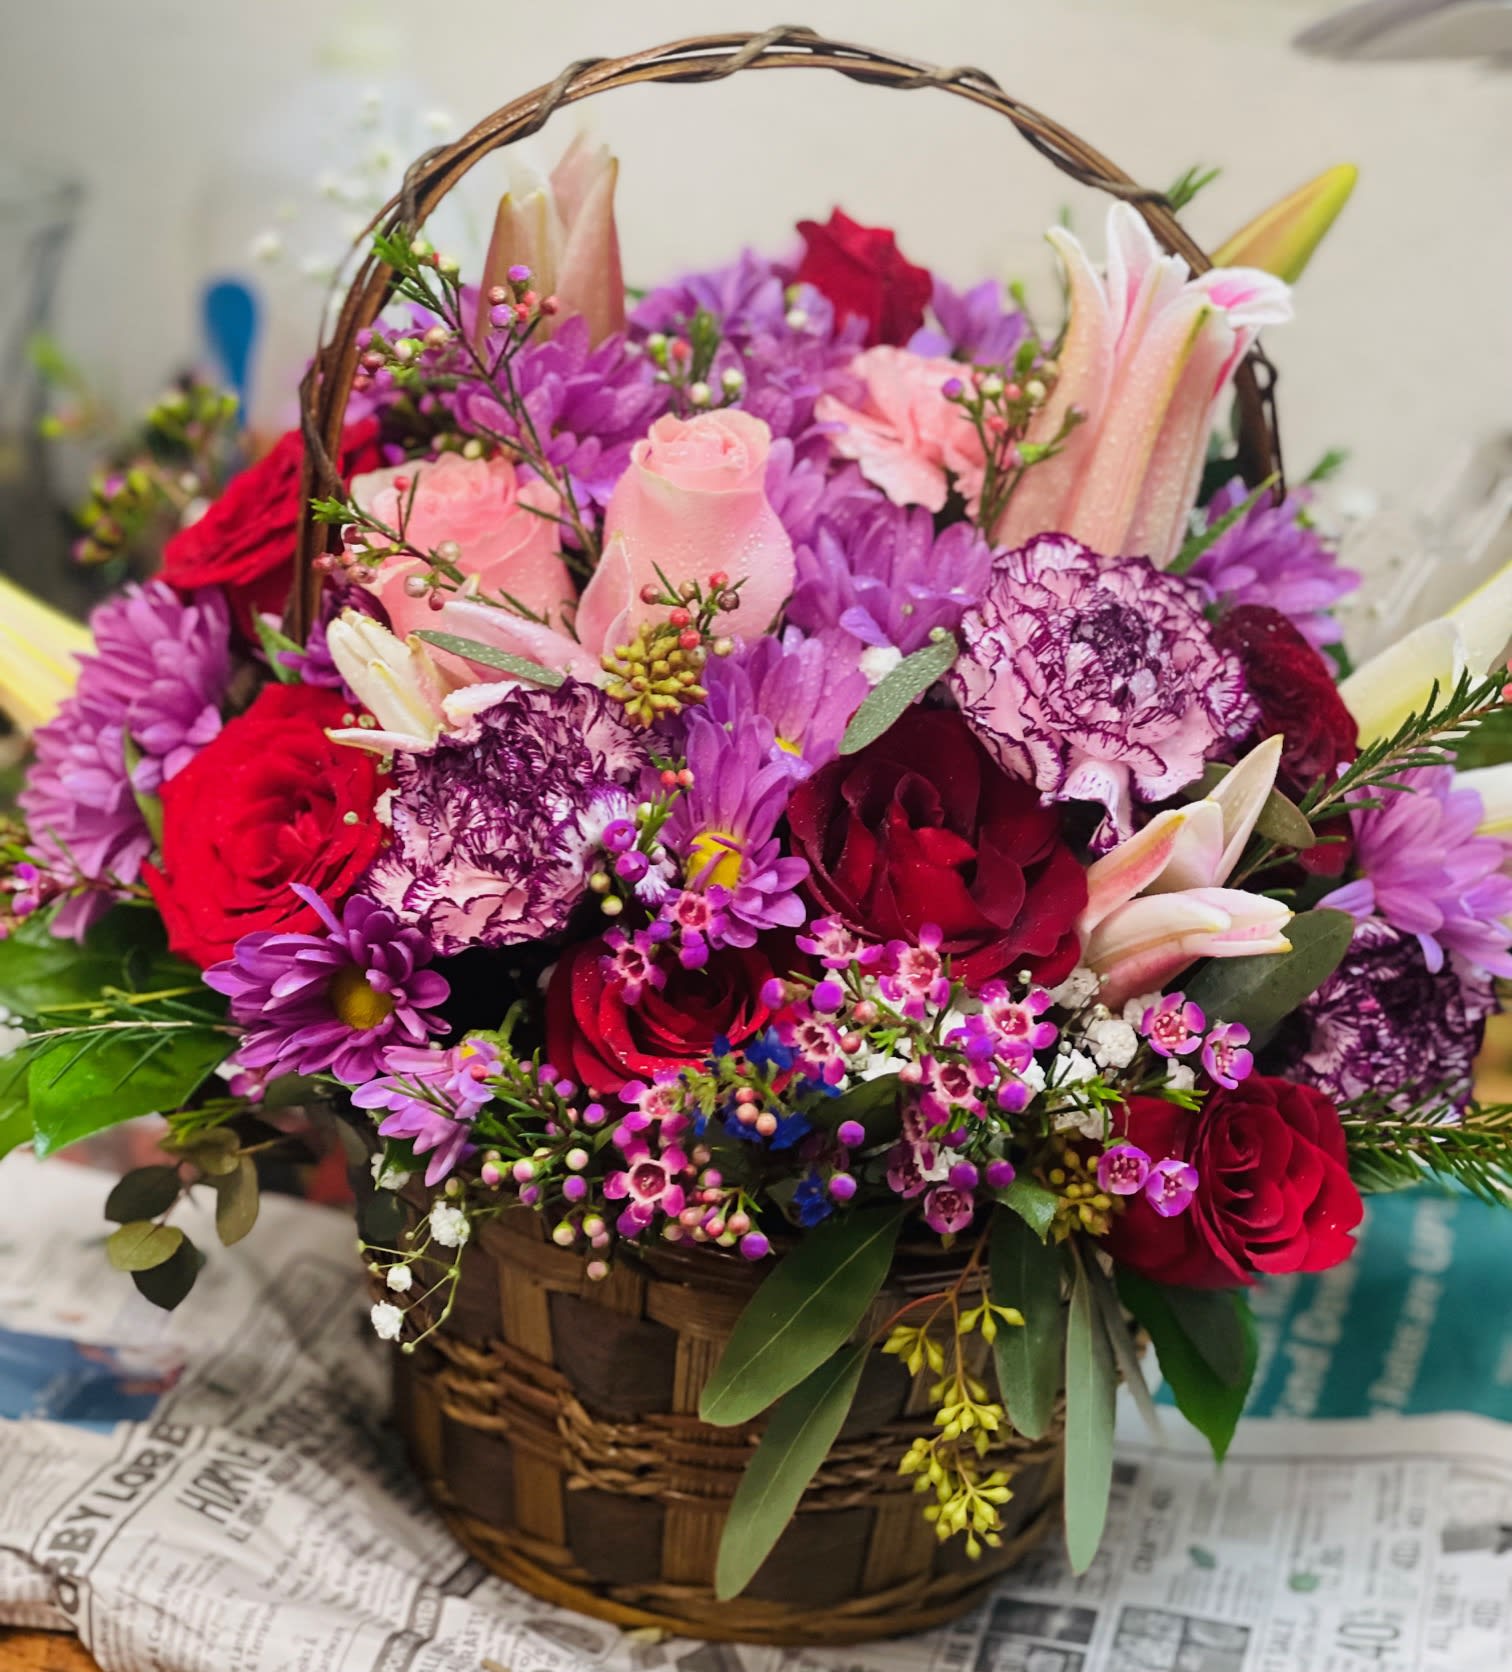 Royal Meadow Basket - Warm tones of reds, pinks and purples are featured in this bright and cheerful basket. A fresh assorted mix of roses, carnations, wax flower, statice, miniature carnations and lilies arranged in a bountiful basket will absolutely impress anyone. 